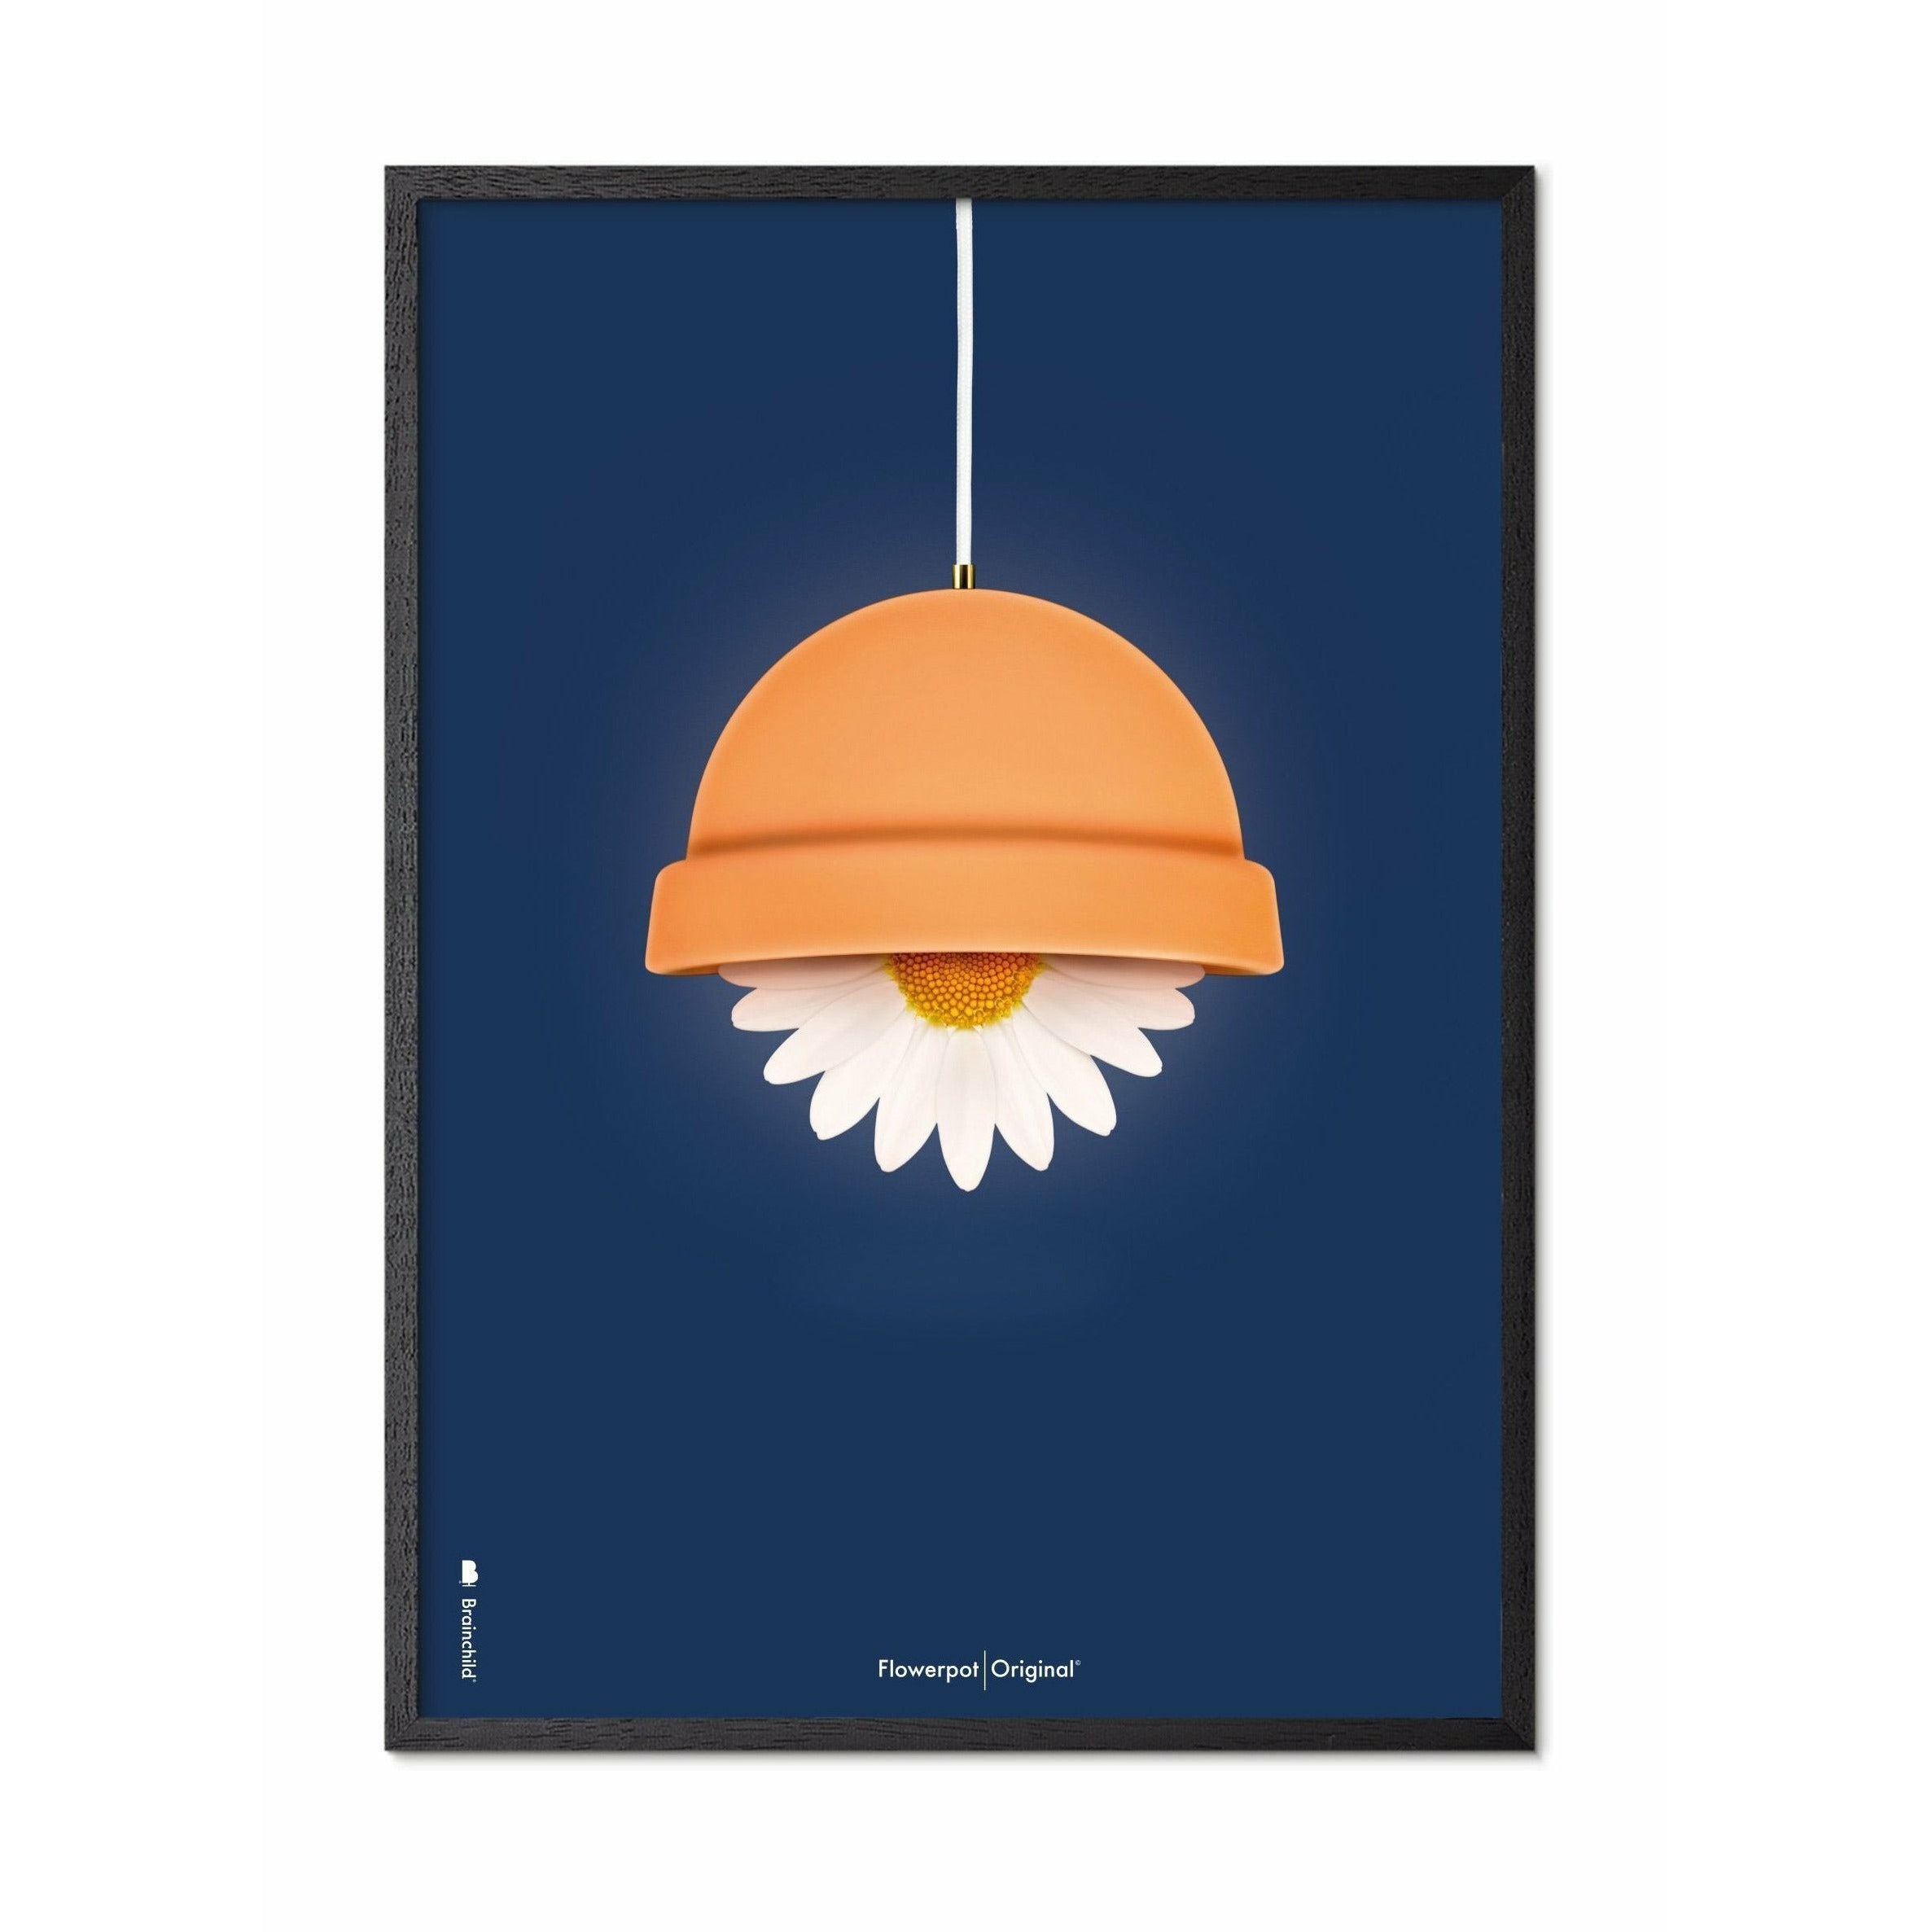 Brainchild Flowerpot Classic Poster, Frame In Black Lacquered Wood A5, Dark Blue Background